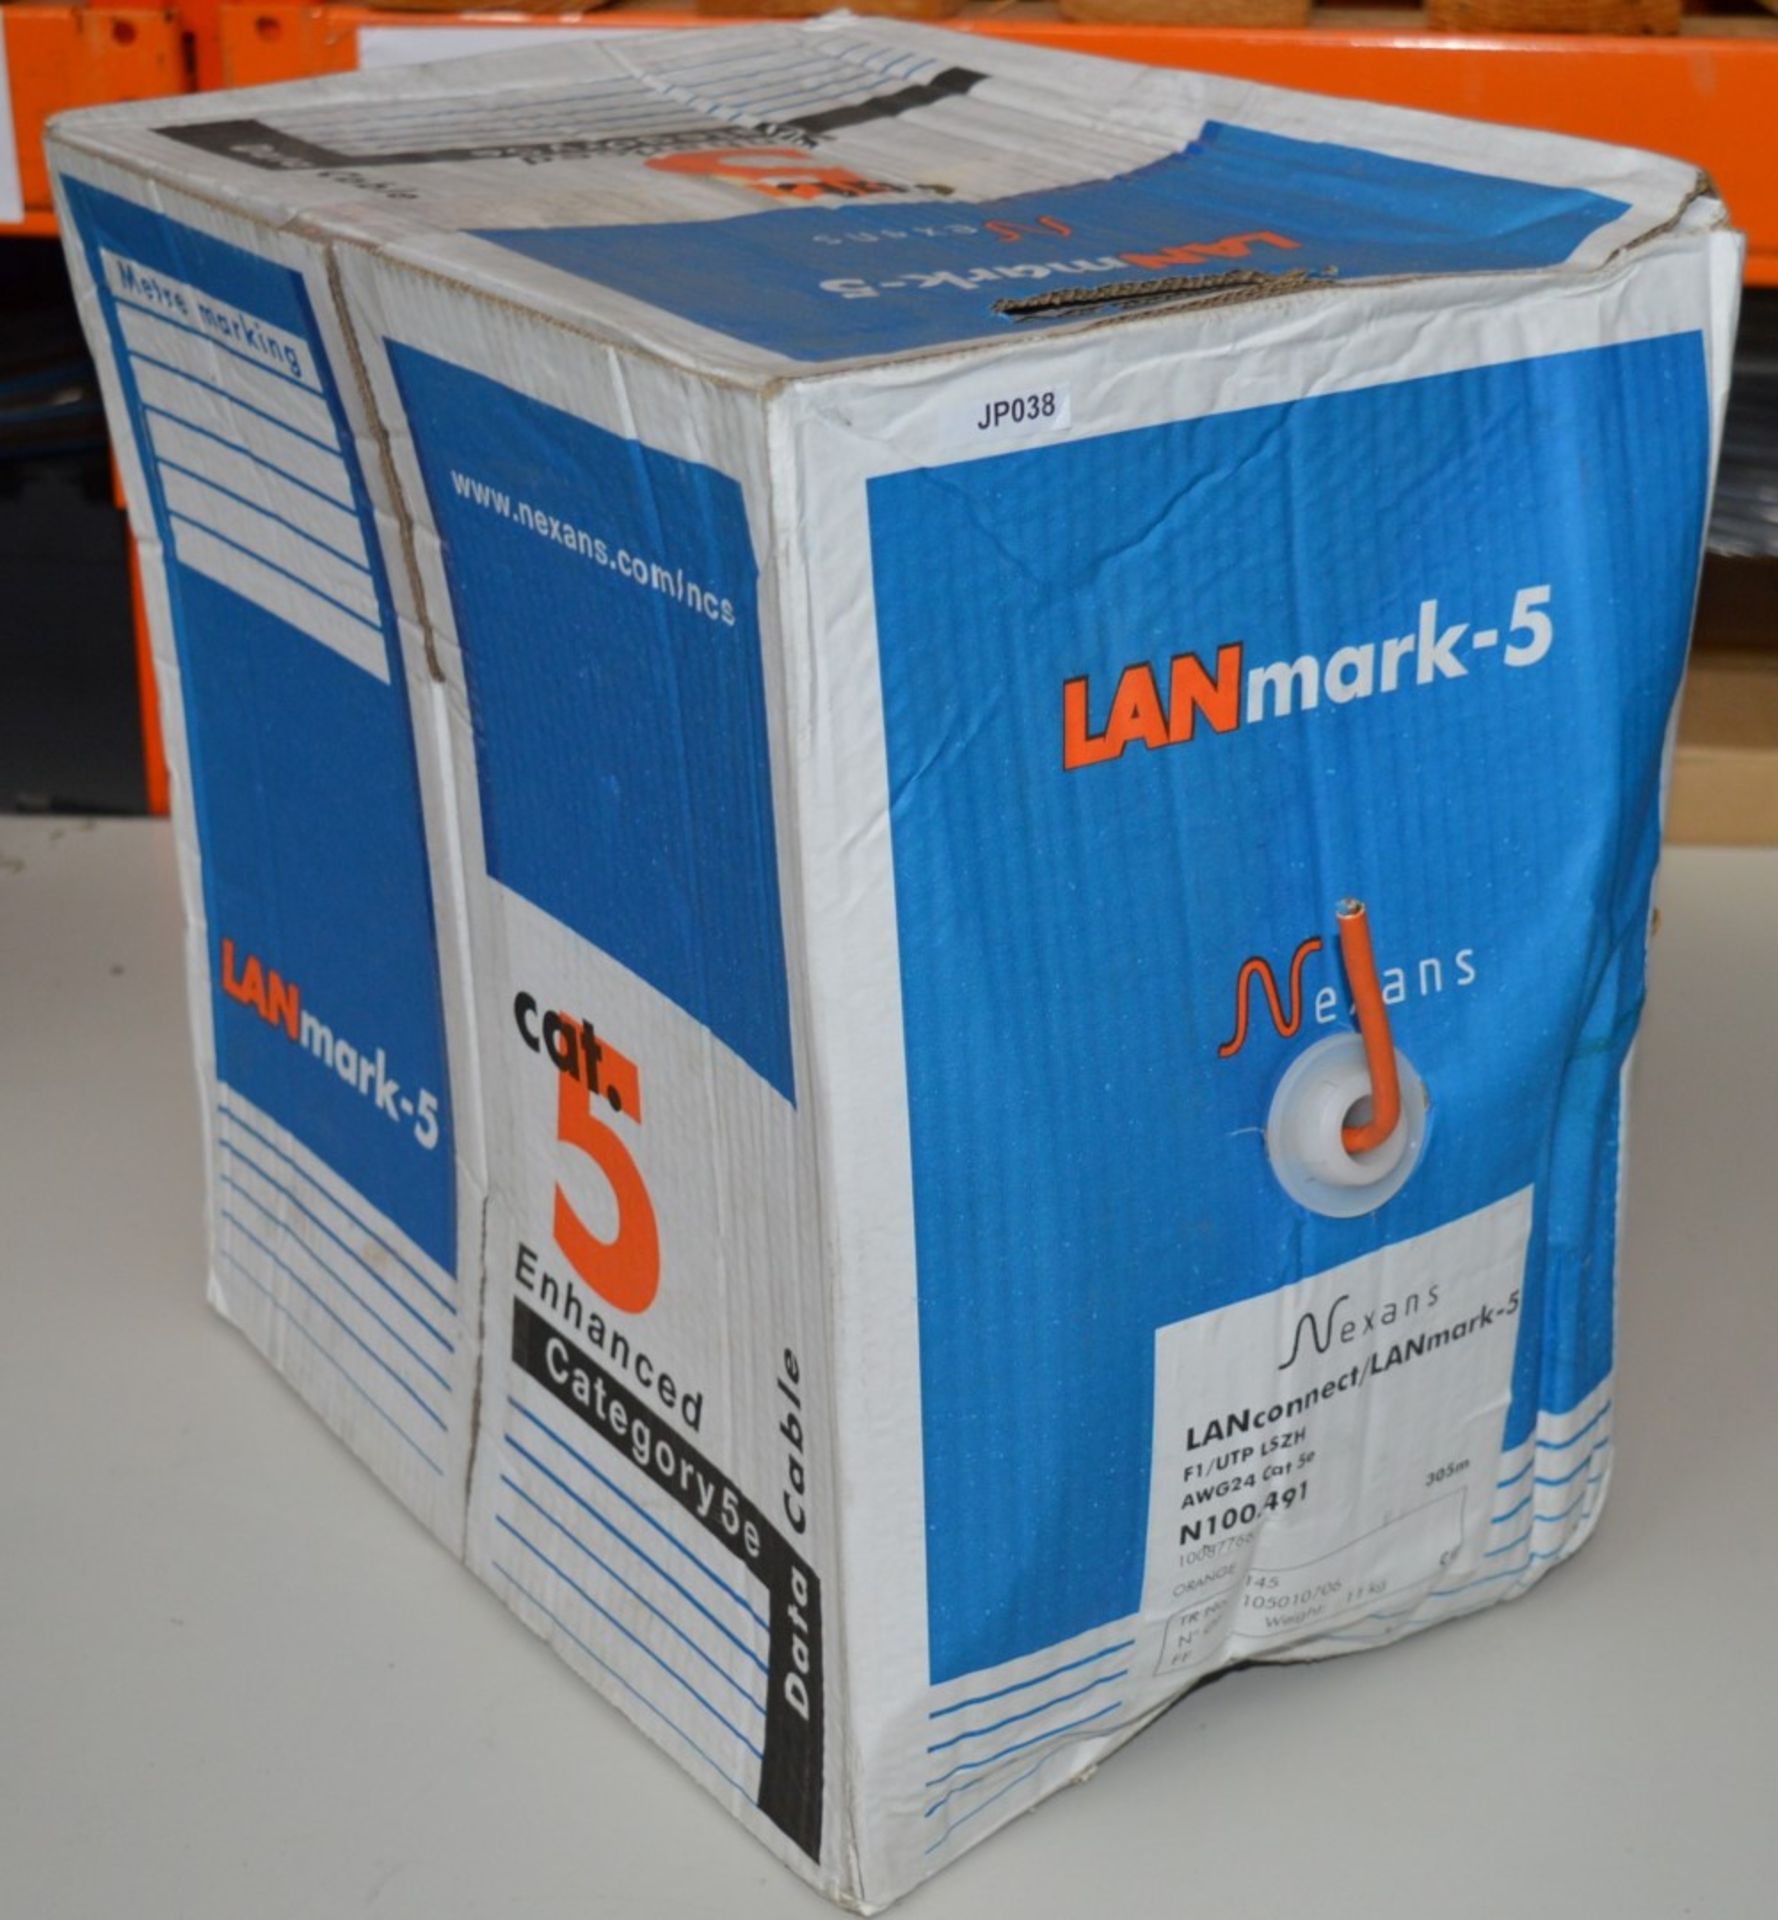 1 x Box of Nexans Lnamark5 Category 5e Cable - Part Used Box With Large Quantity Included - Box Size - Image 4 of 4